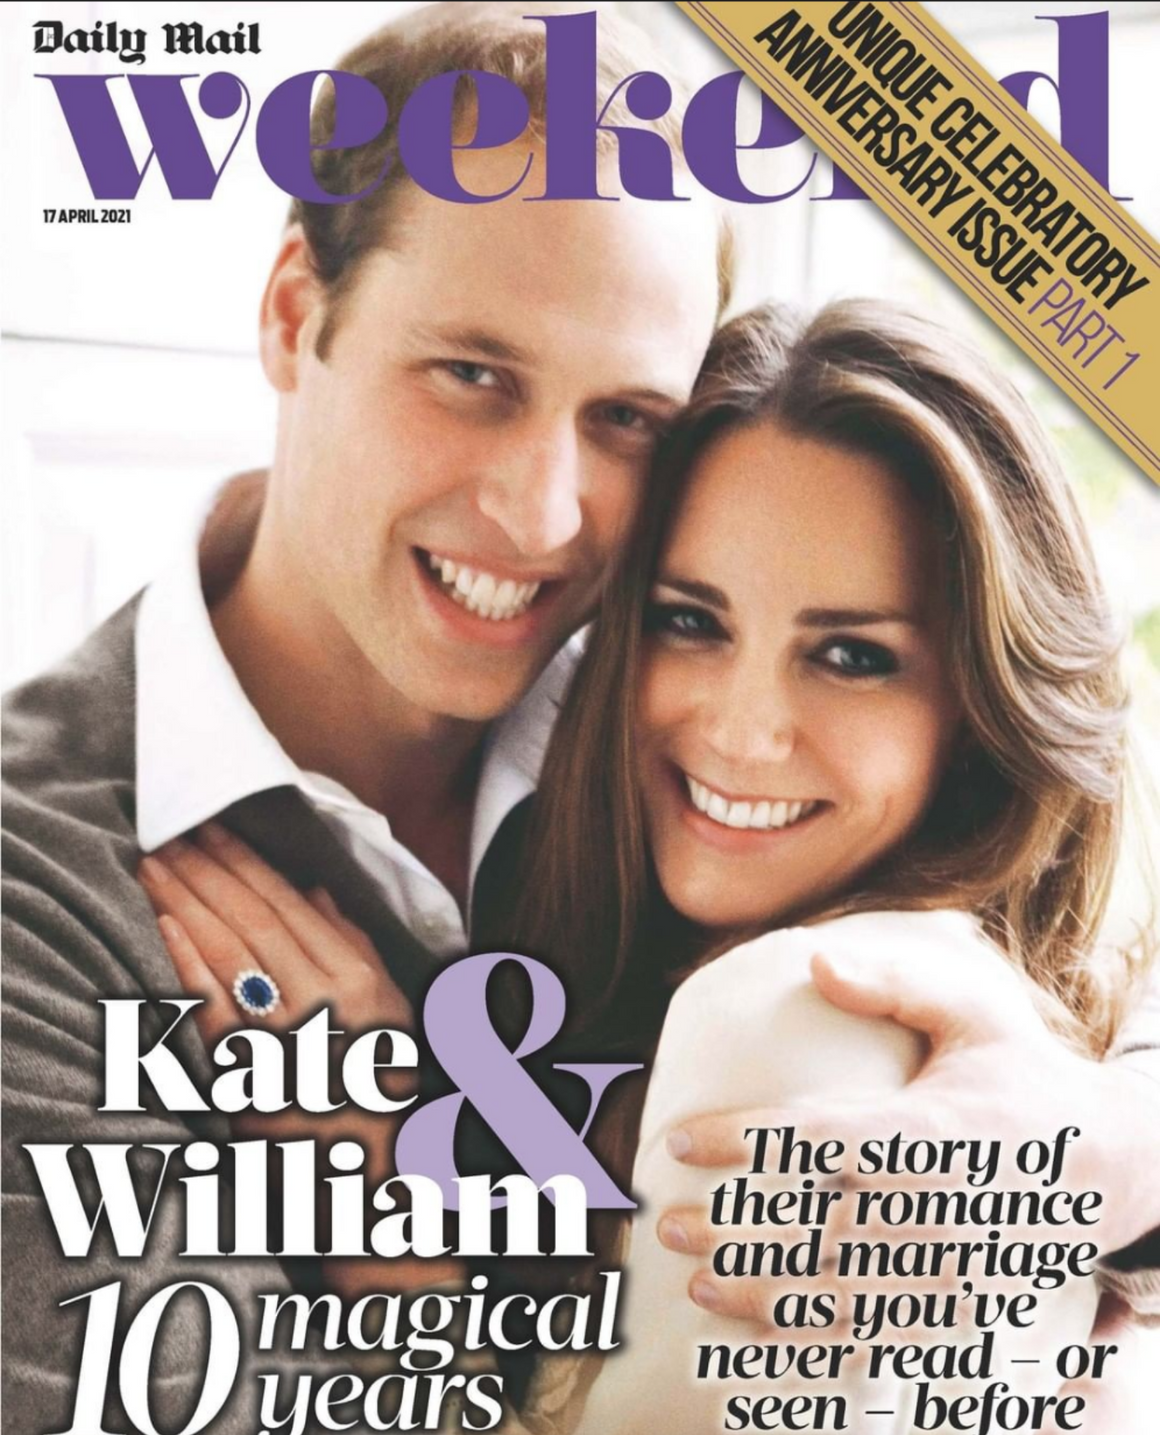 Kate Middleton Prince William Weekend Magazine Anniversary Issue -10 Magical Years